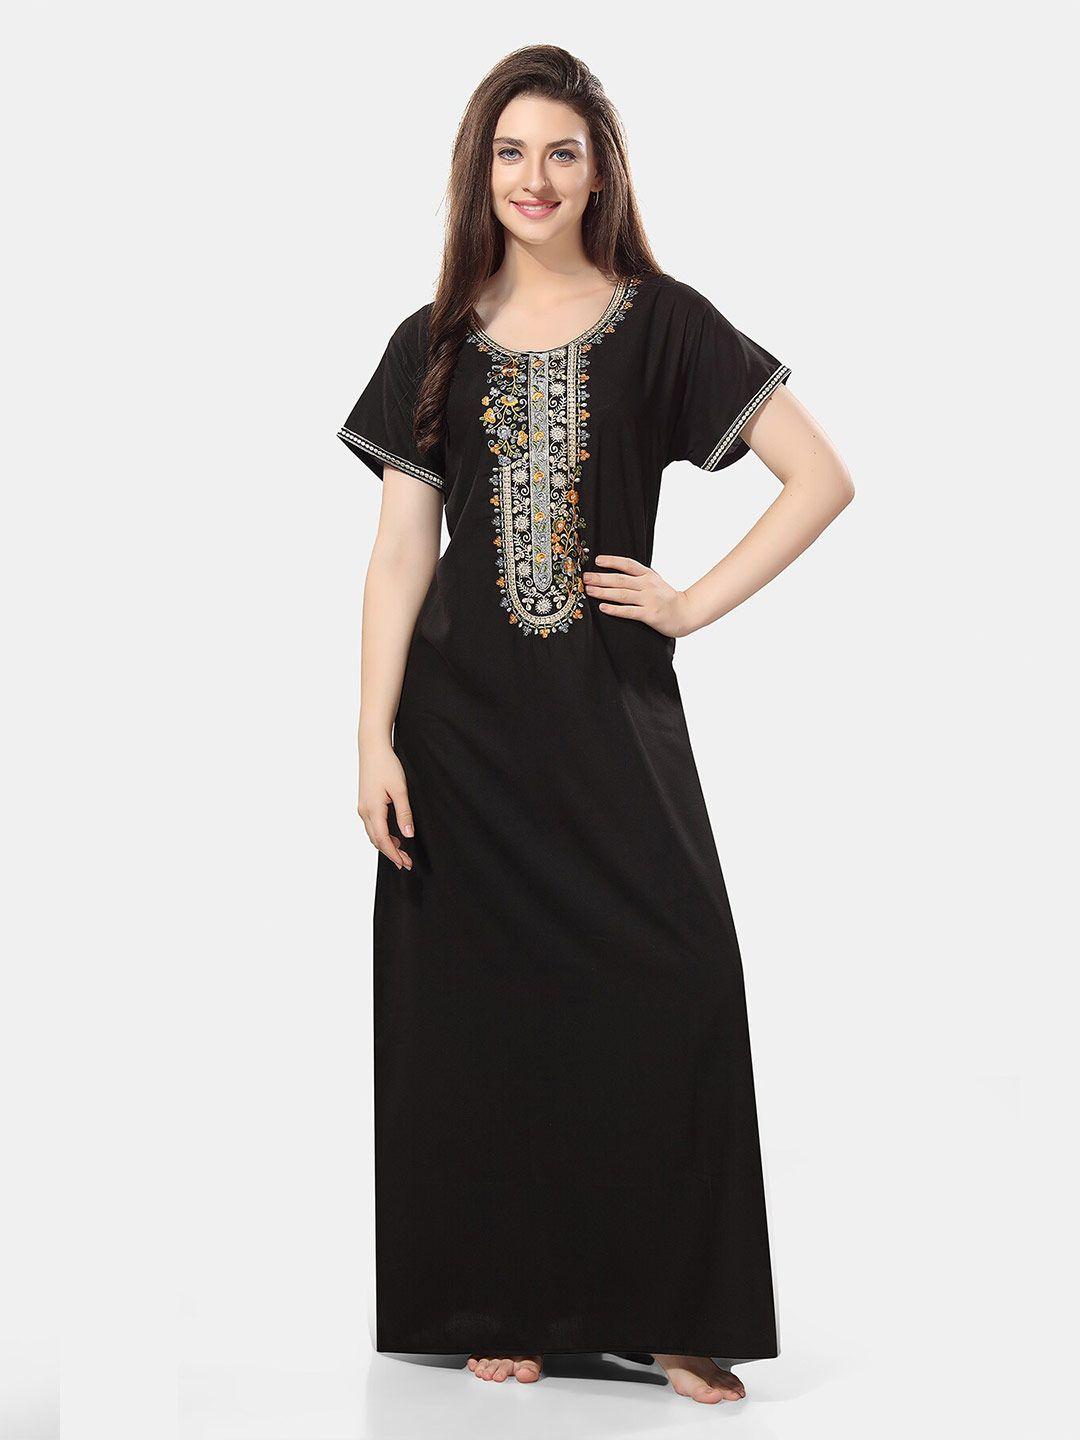 be-you-floral-embroidered-maxi-nightdress